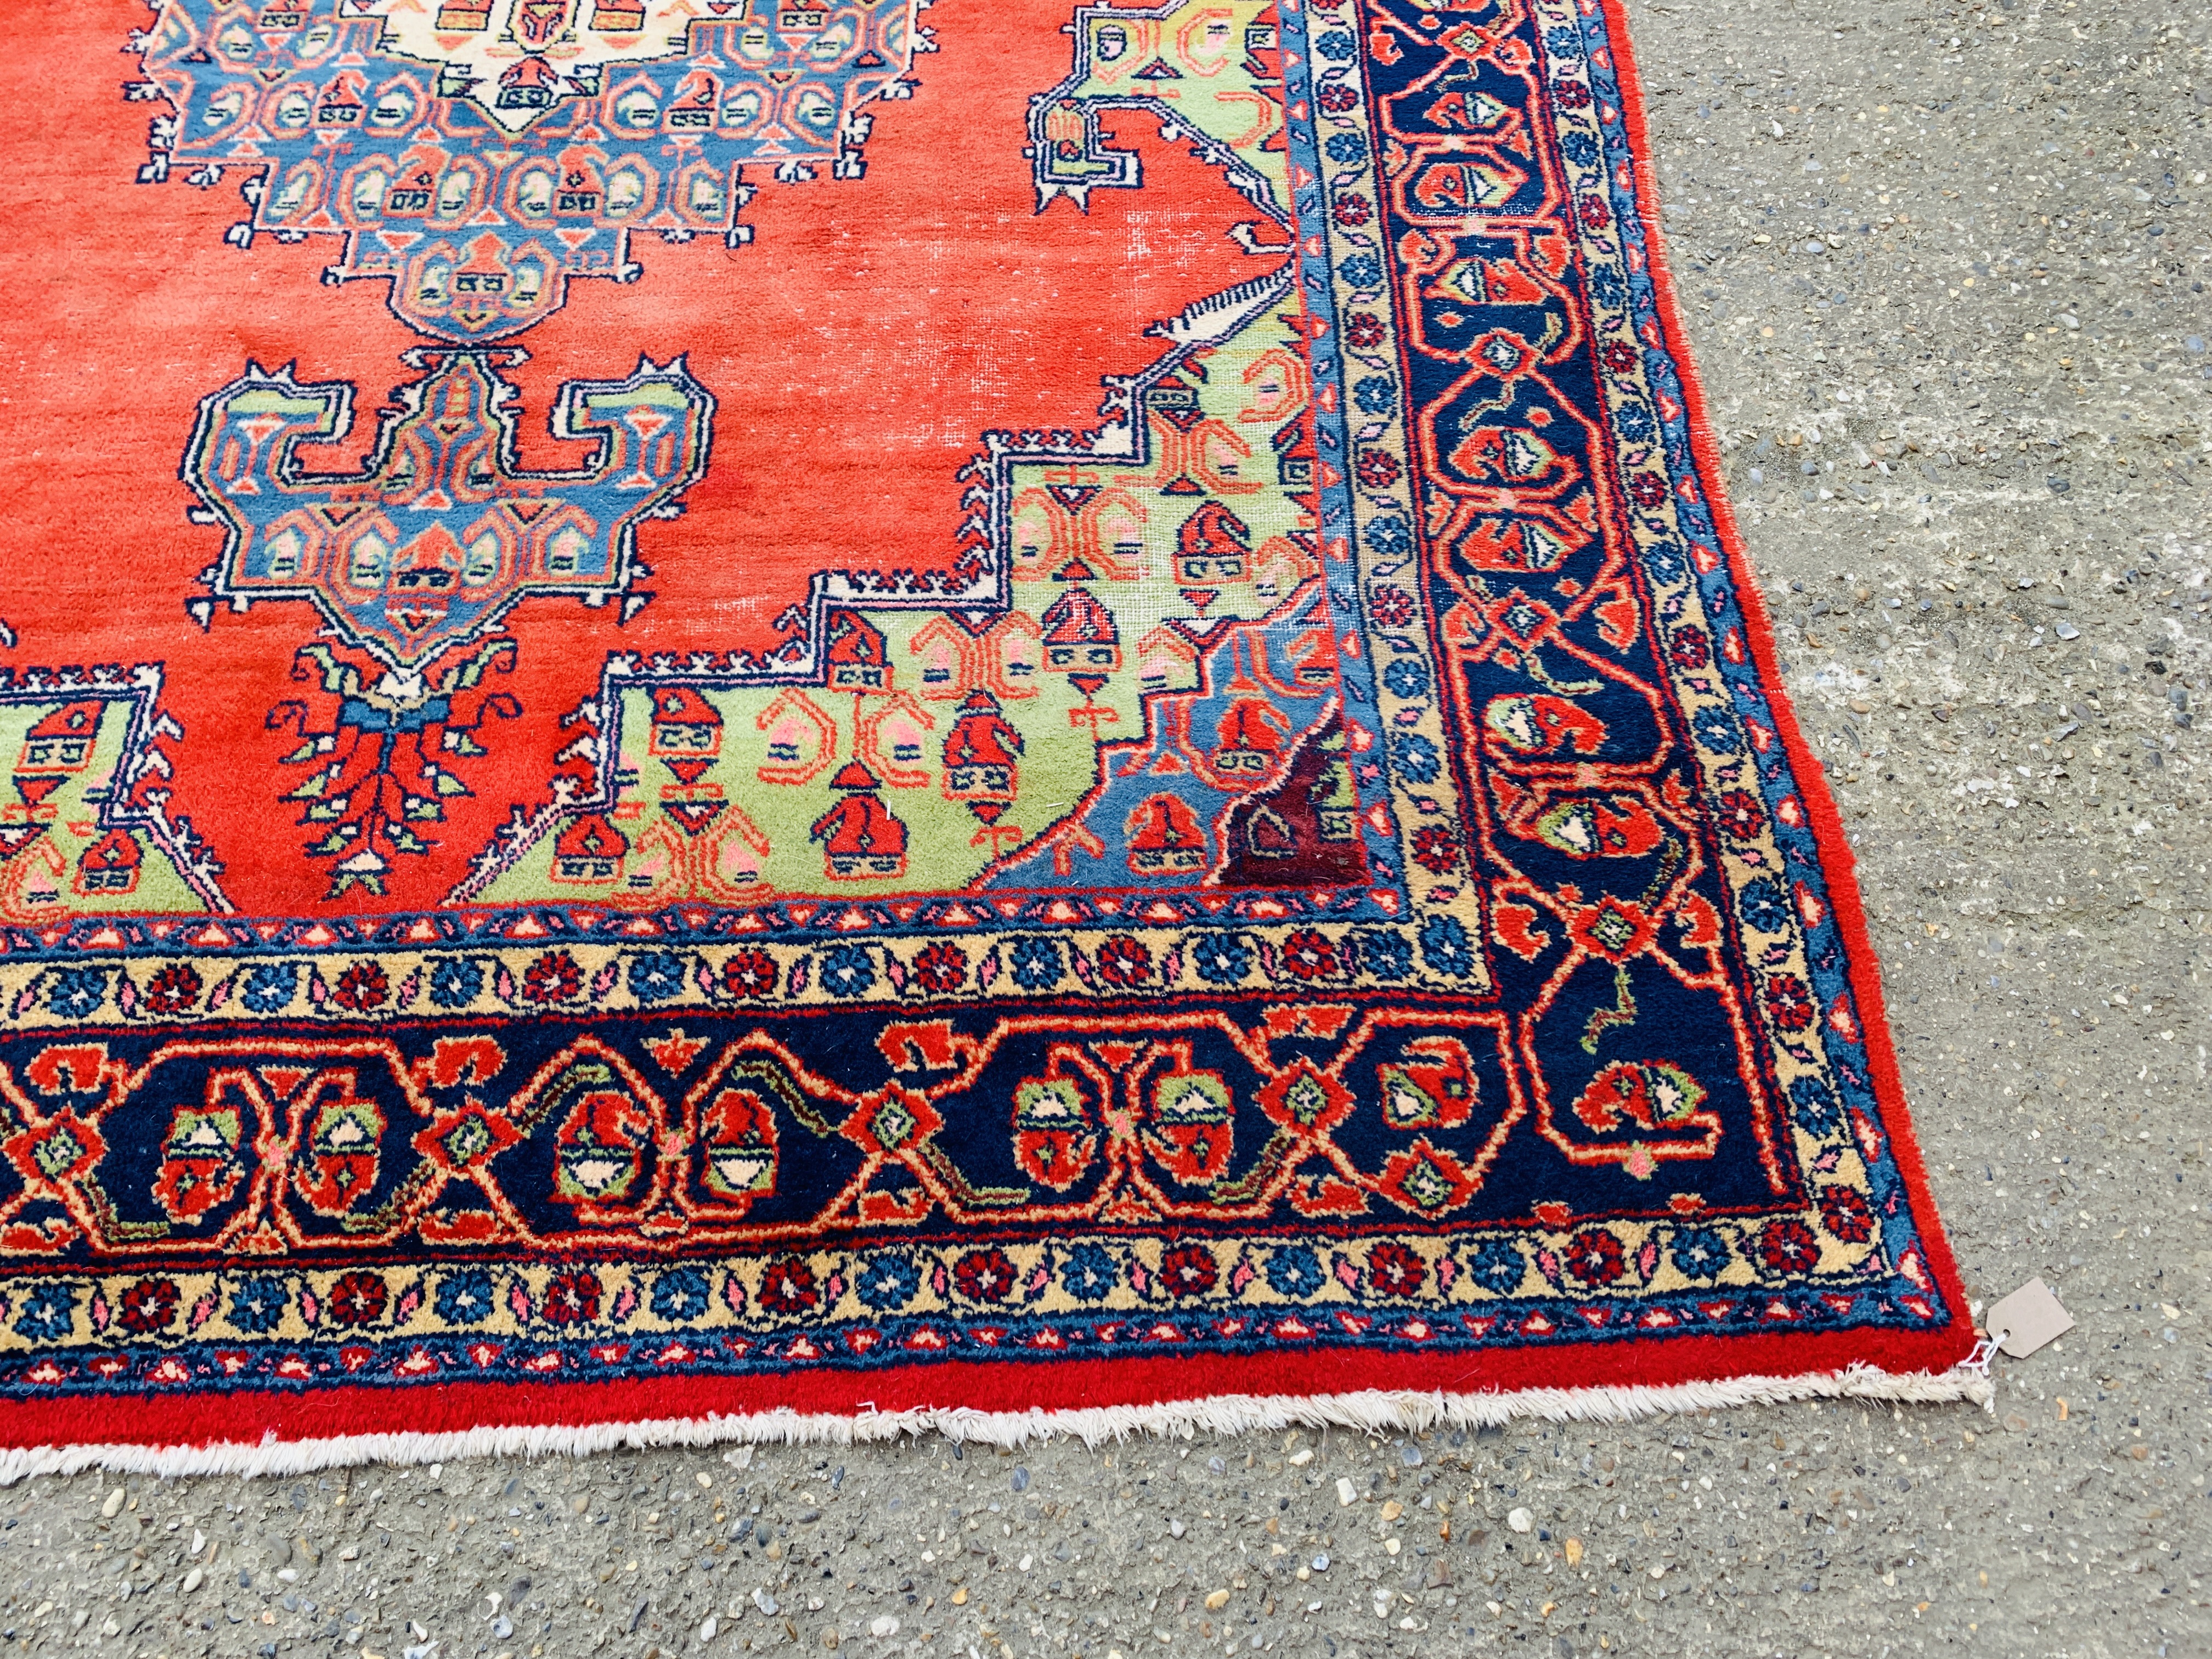 A GOOD QUALITY RED / BLUE PATTERNED EASTERN CARPET 3.3M X 3.15M. - Image 3 of 11